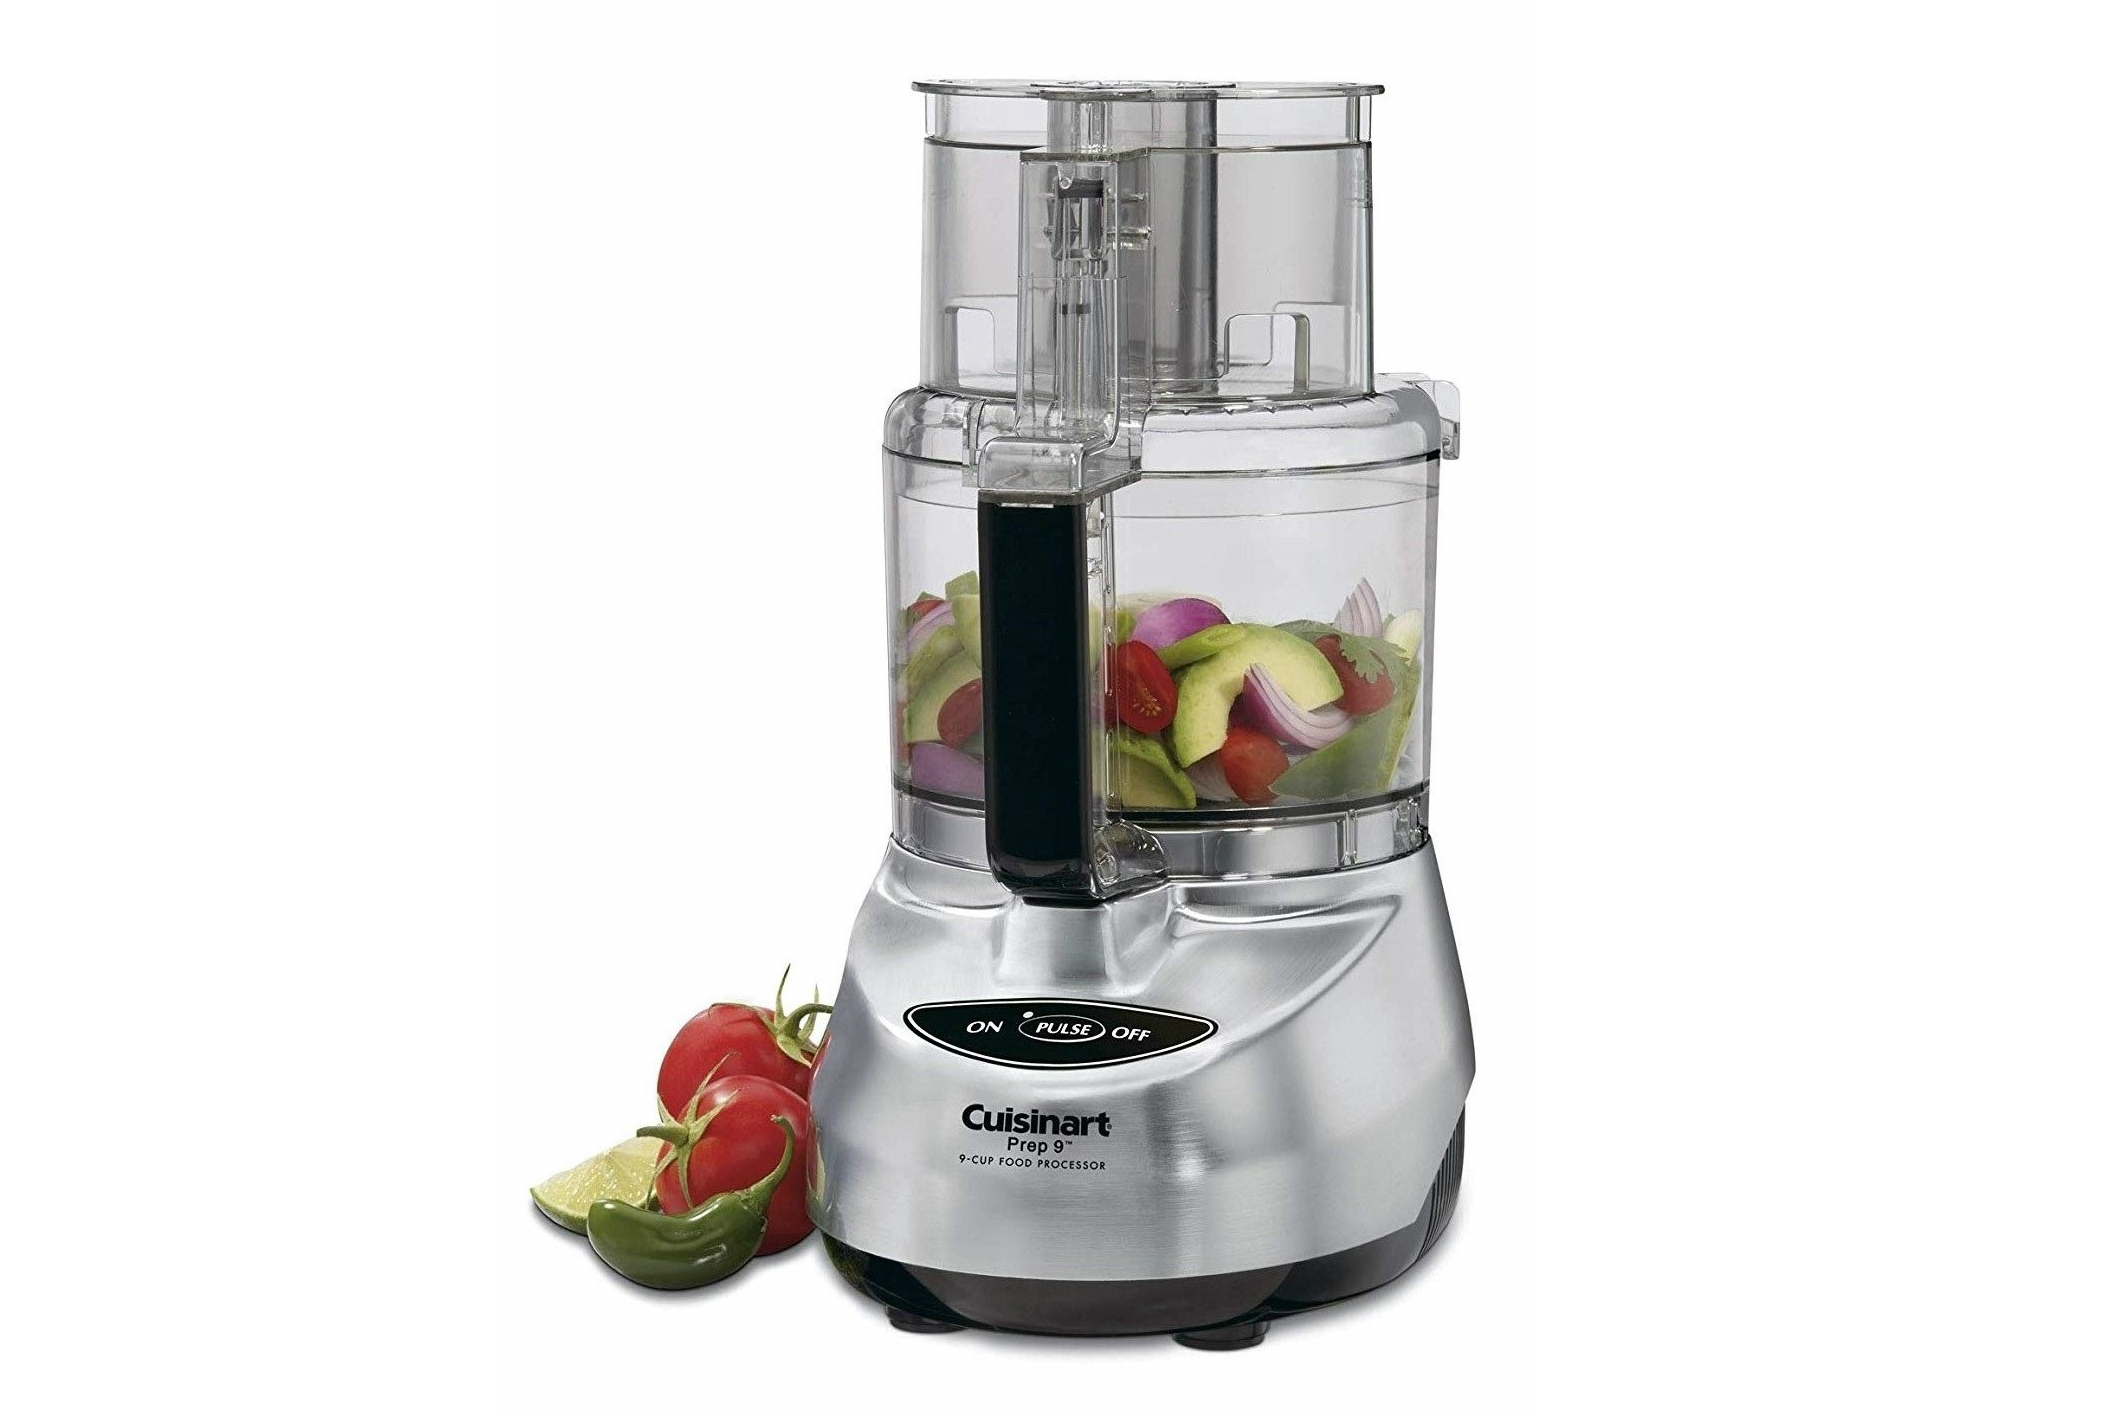 Cuisinart DLC-2009CHBMY Prep 9 9-Cup Food Processor, Brushed Stainless